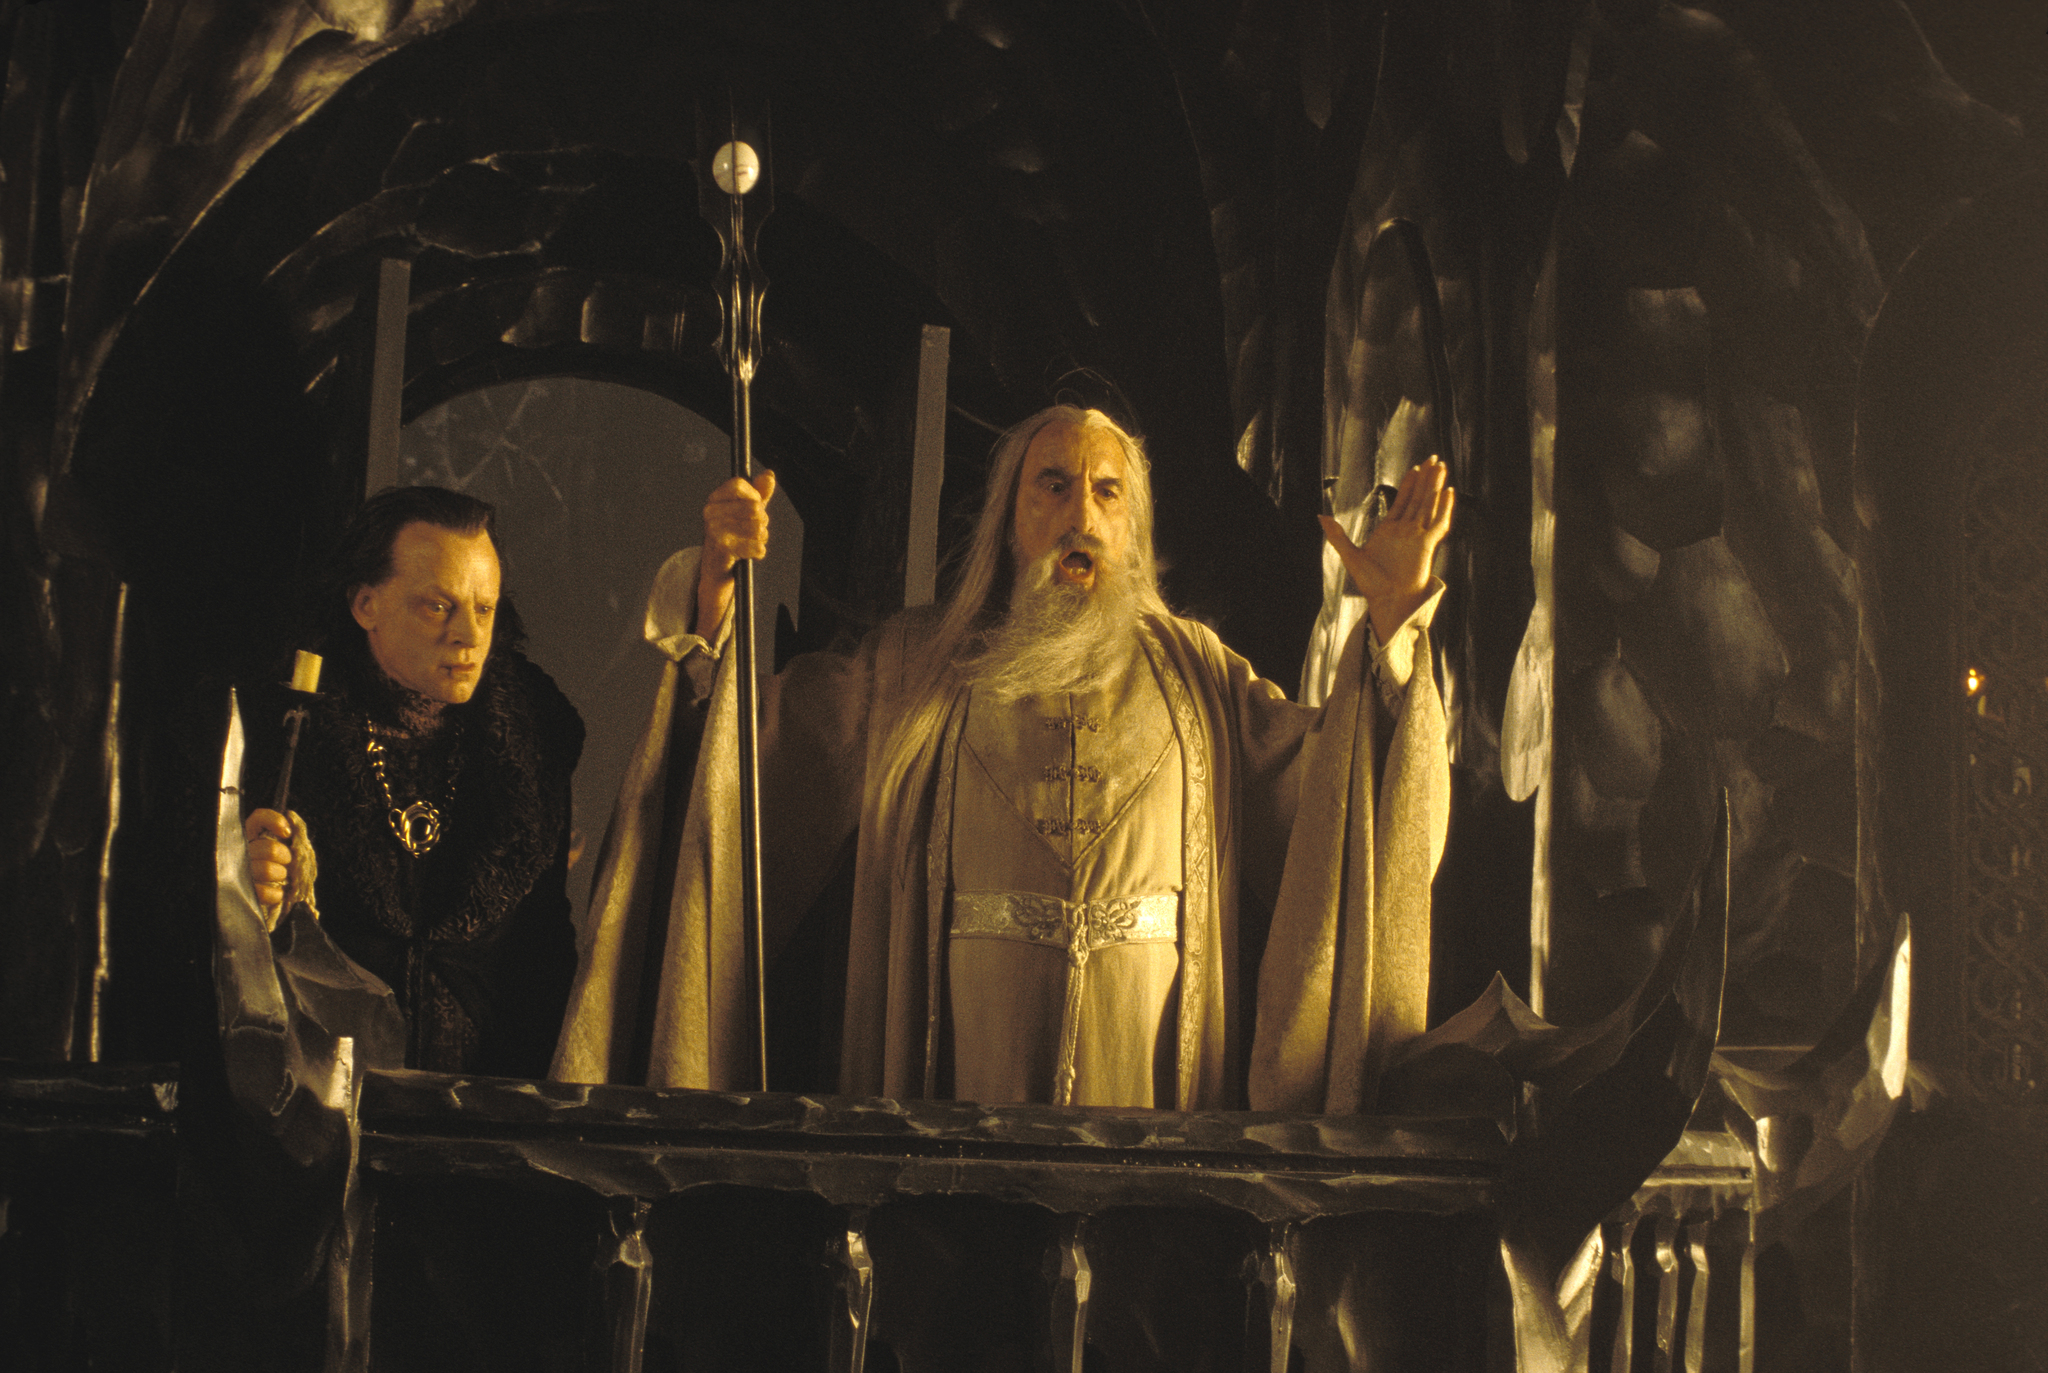 Brad Dourif and Christopher Lee in The Lord of the Rings: The Two Towers (2002)